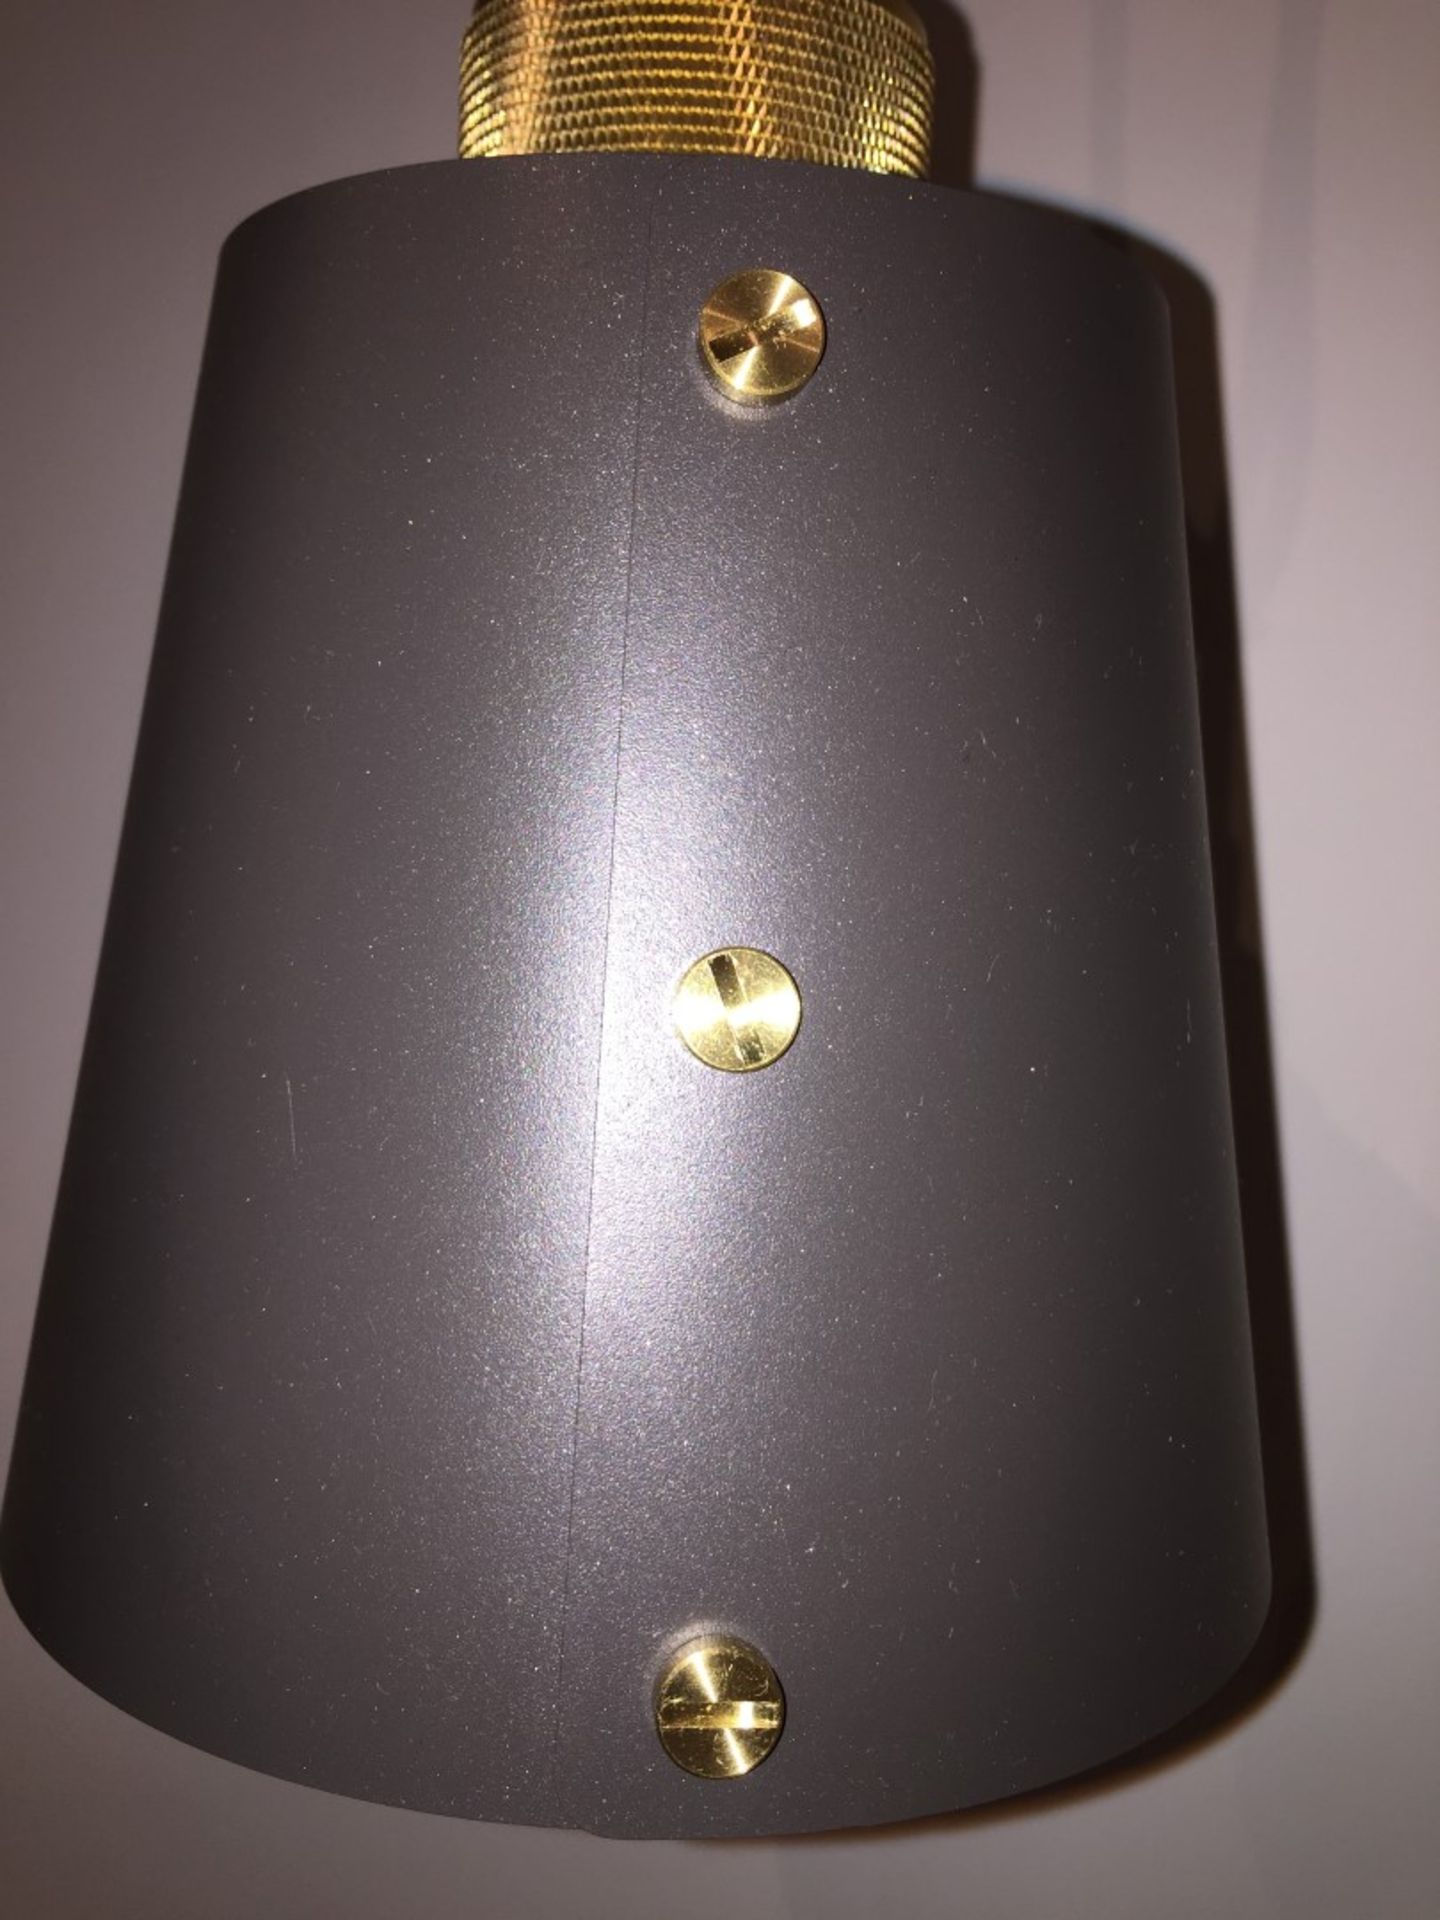 1 x BUSTER + PUNCH Hooked Wall Light With Metal Shade - Ref: WS/FF160D - CL204 - Location: London Ci - Image 8 of 10